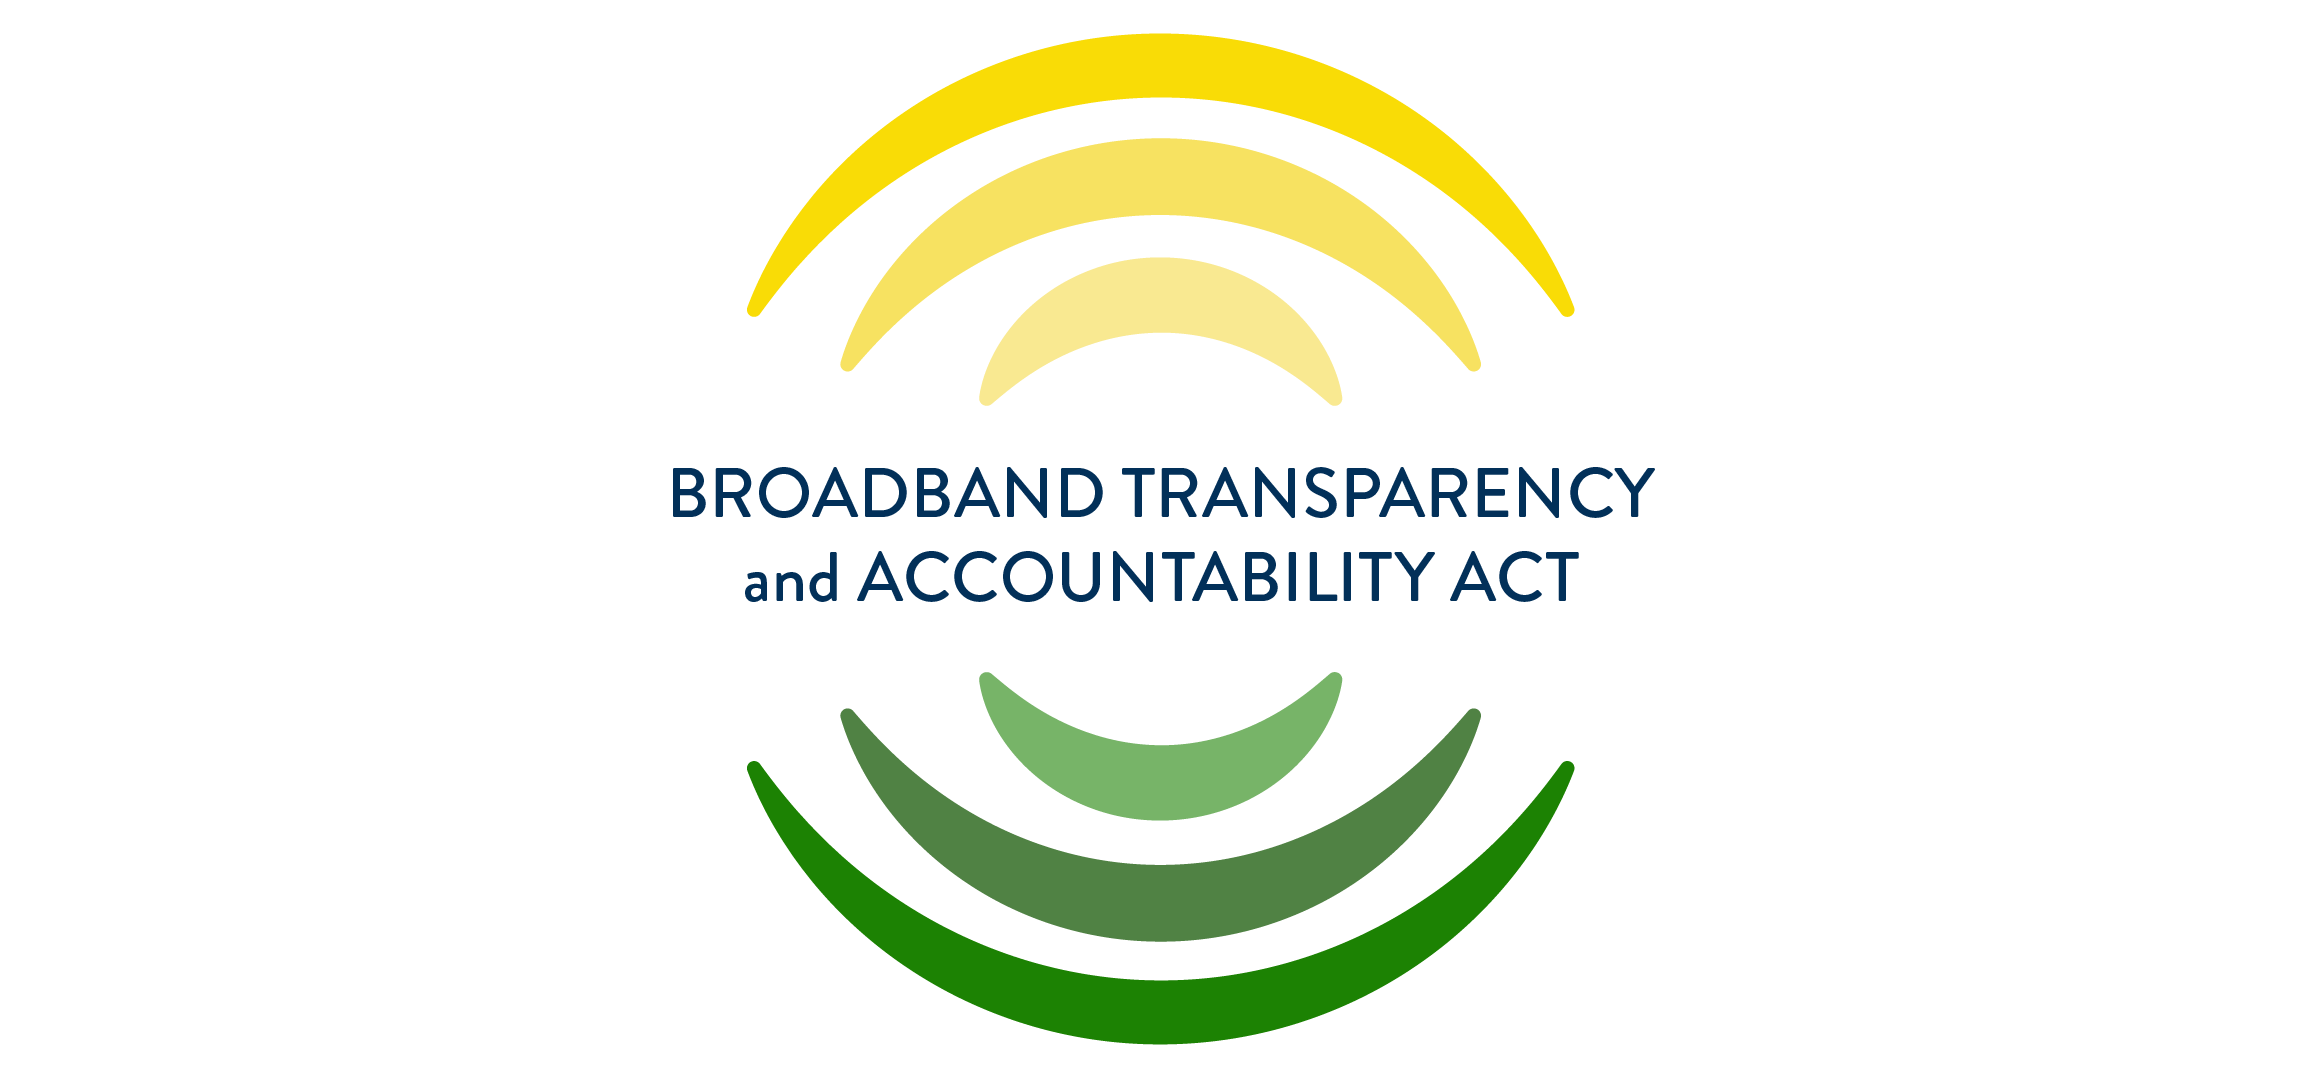 Broadband Transparency and Accountability Act